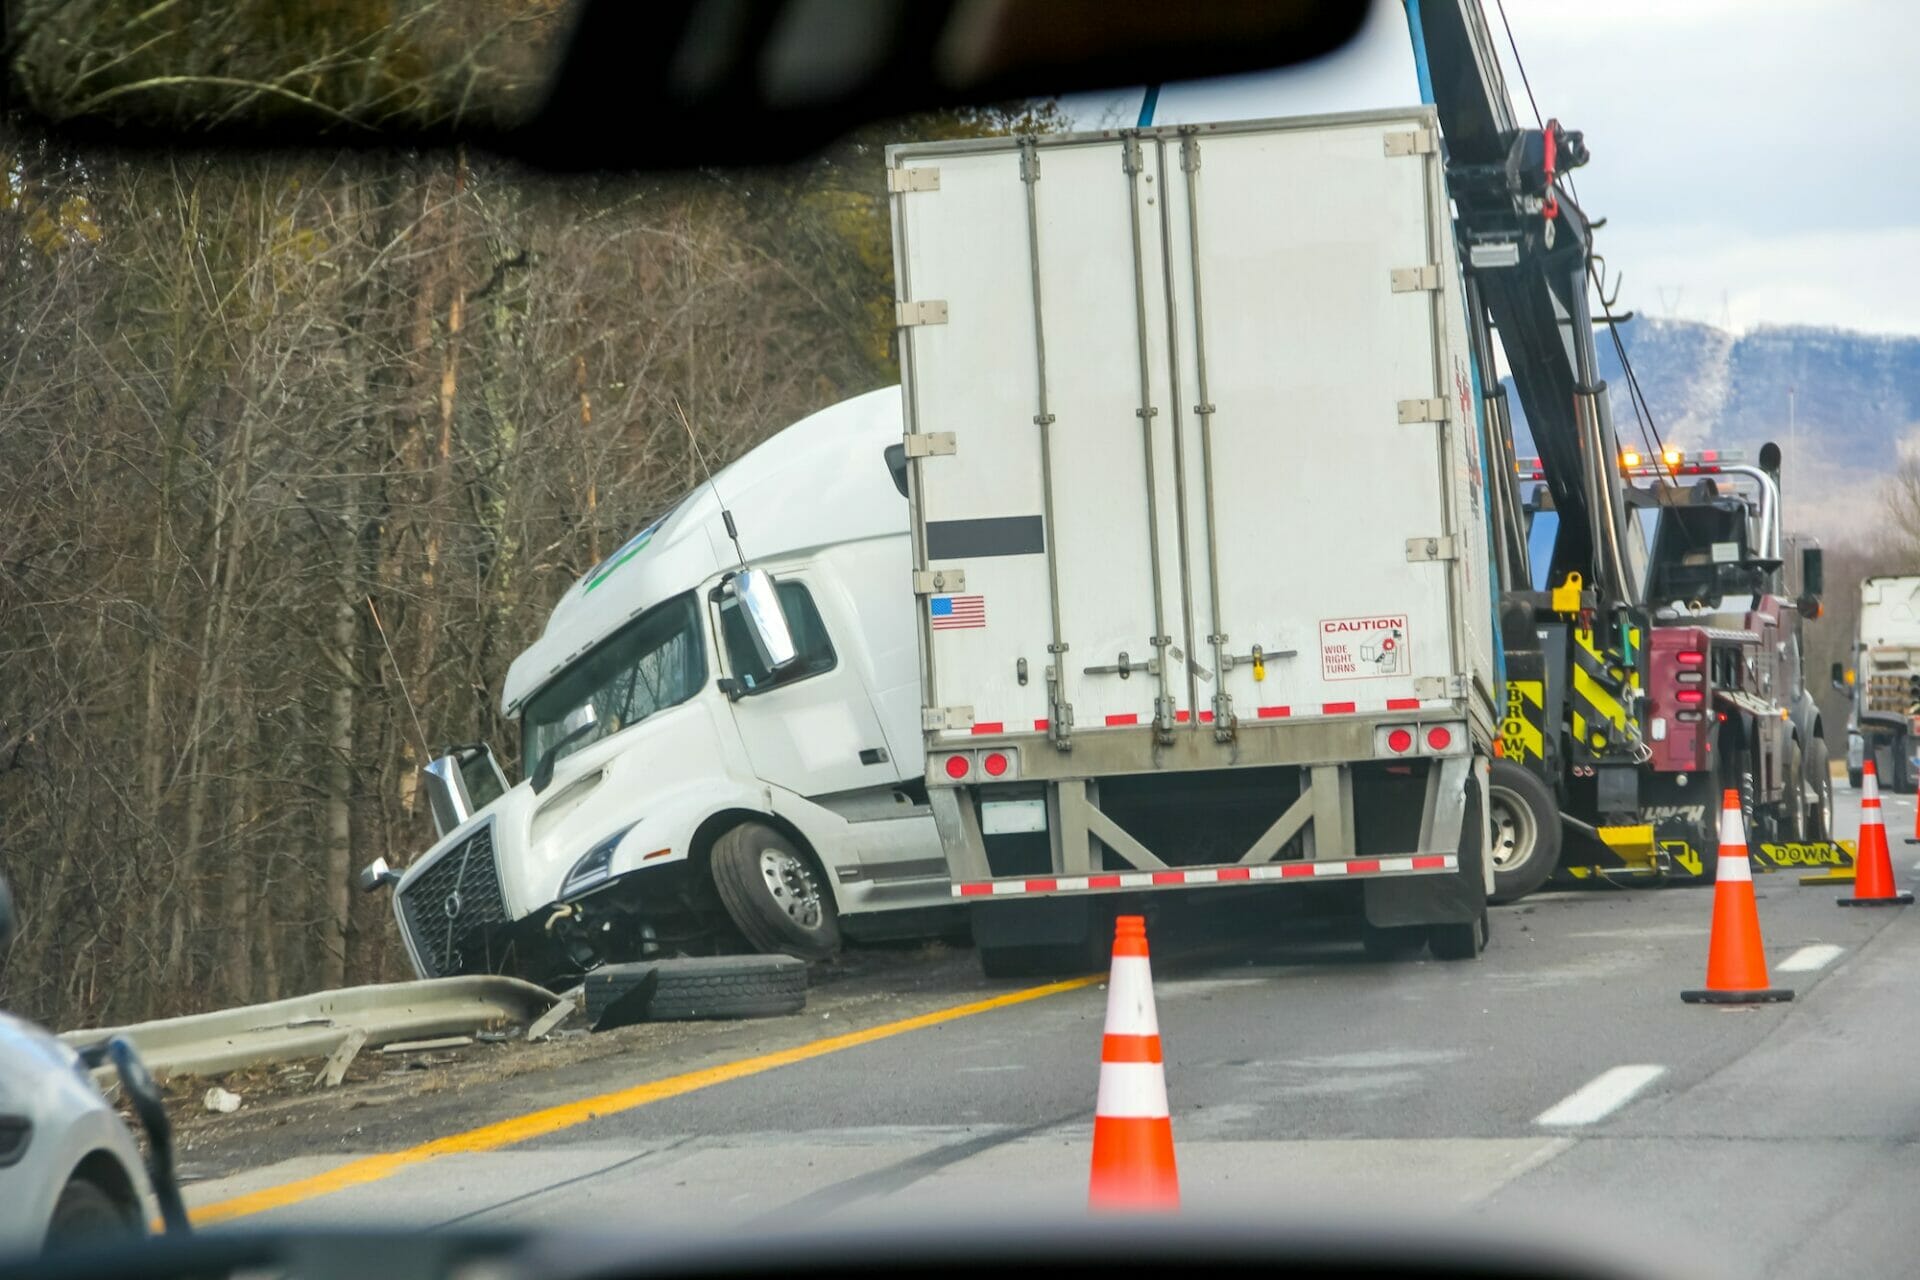 A semi truck involved in an auto accident on the side of the road.